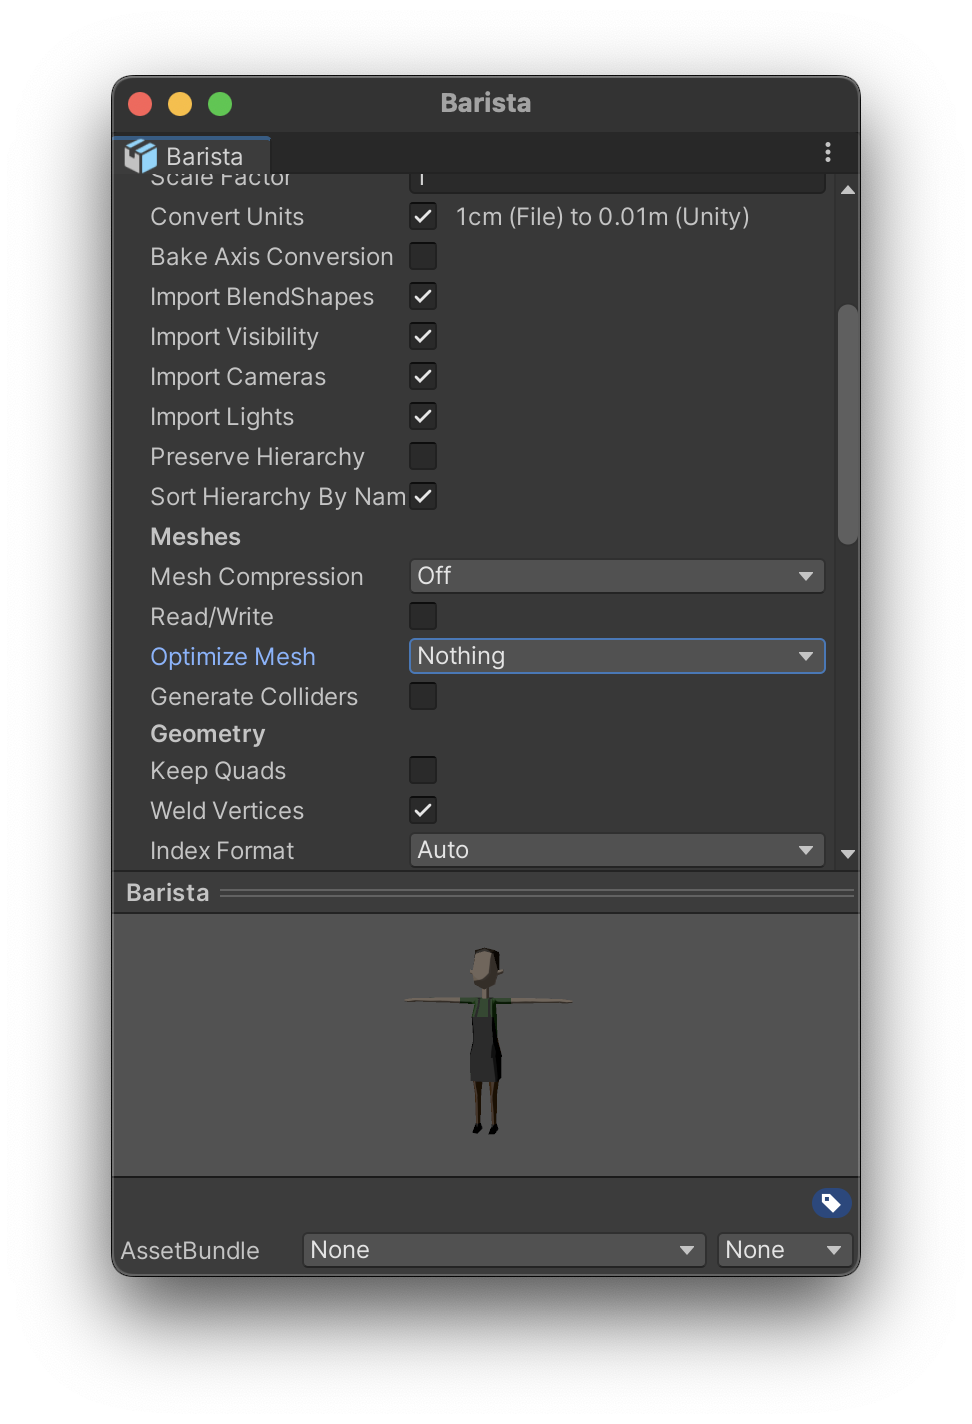 Screenshot of the Optimize Mesh option for the imported model